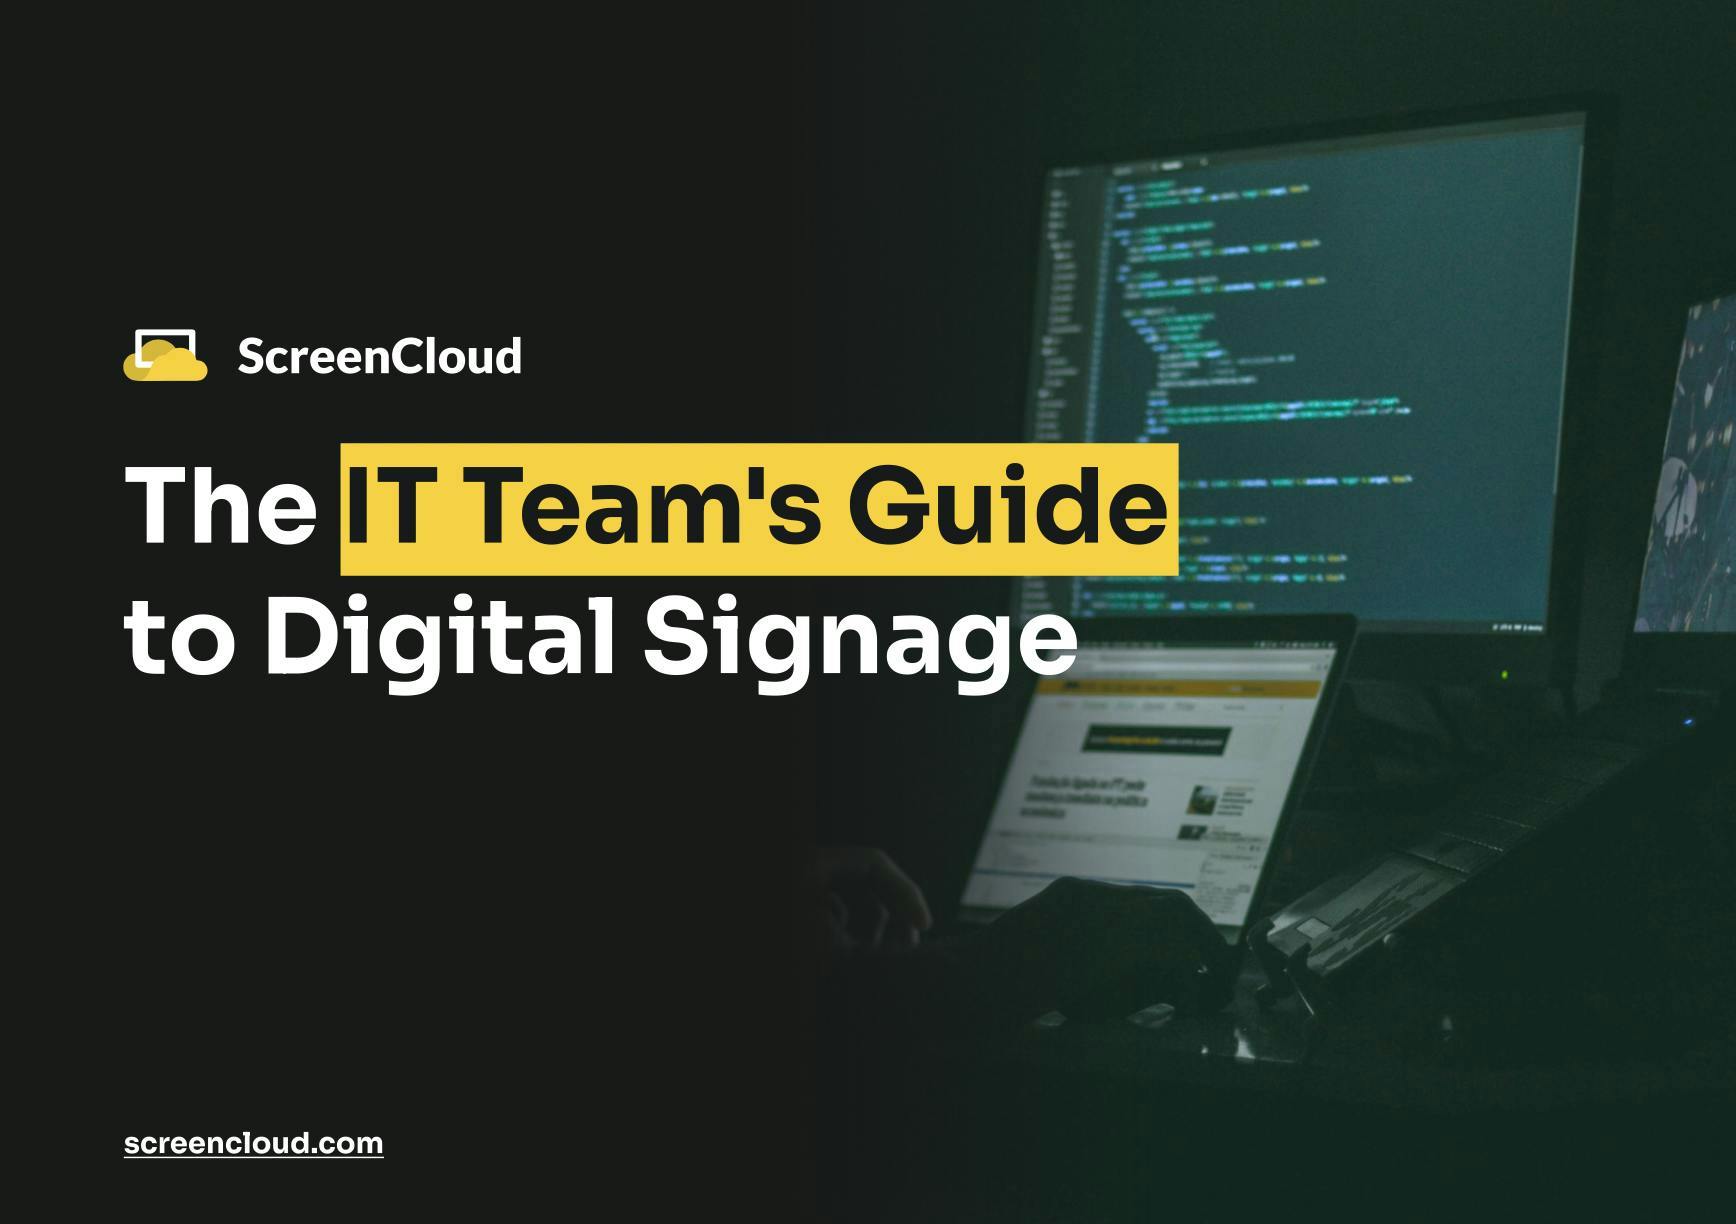 ScreenCloud Article - The IT Team's Guide to Digital Signage